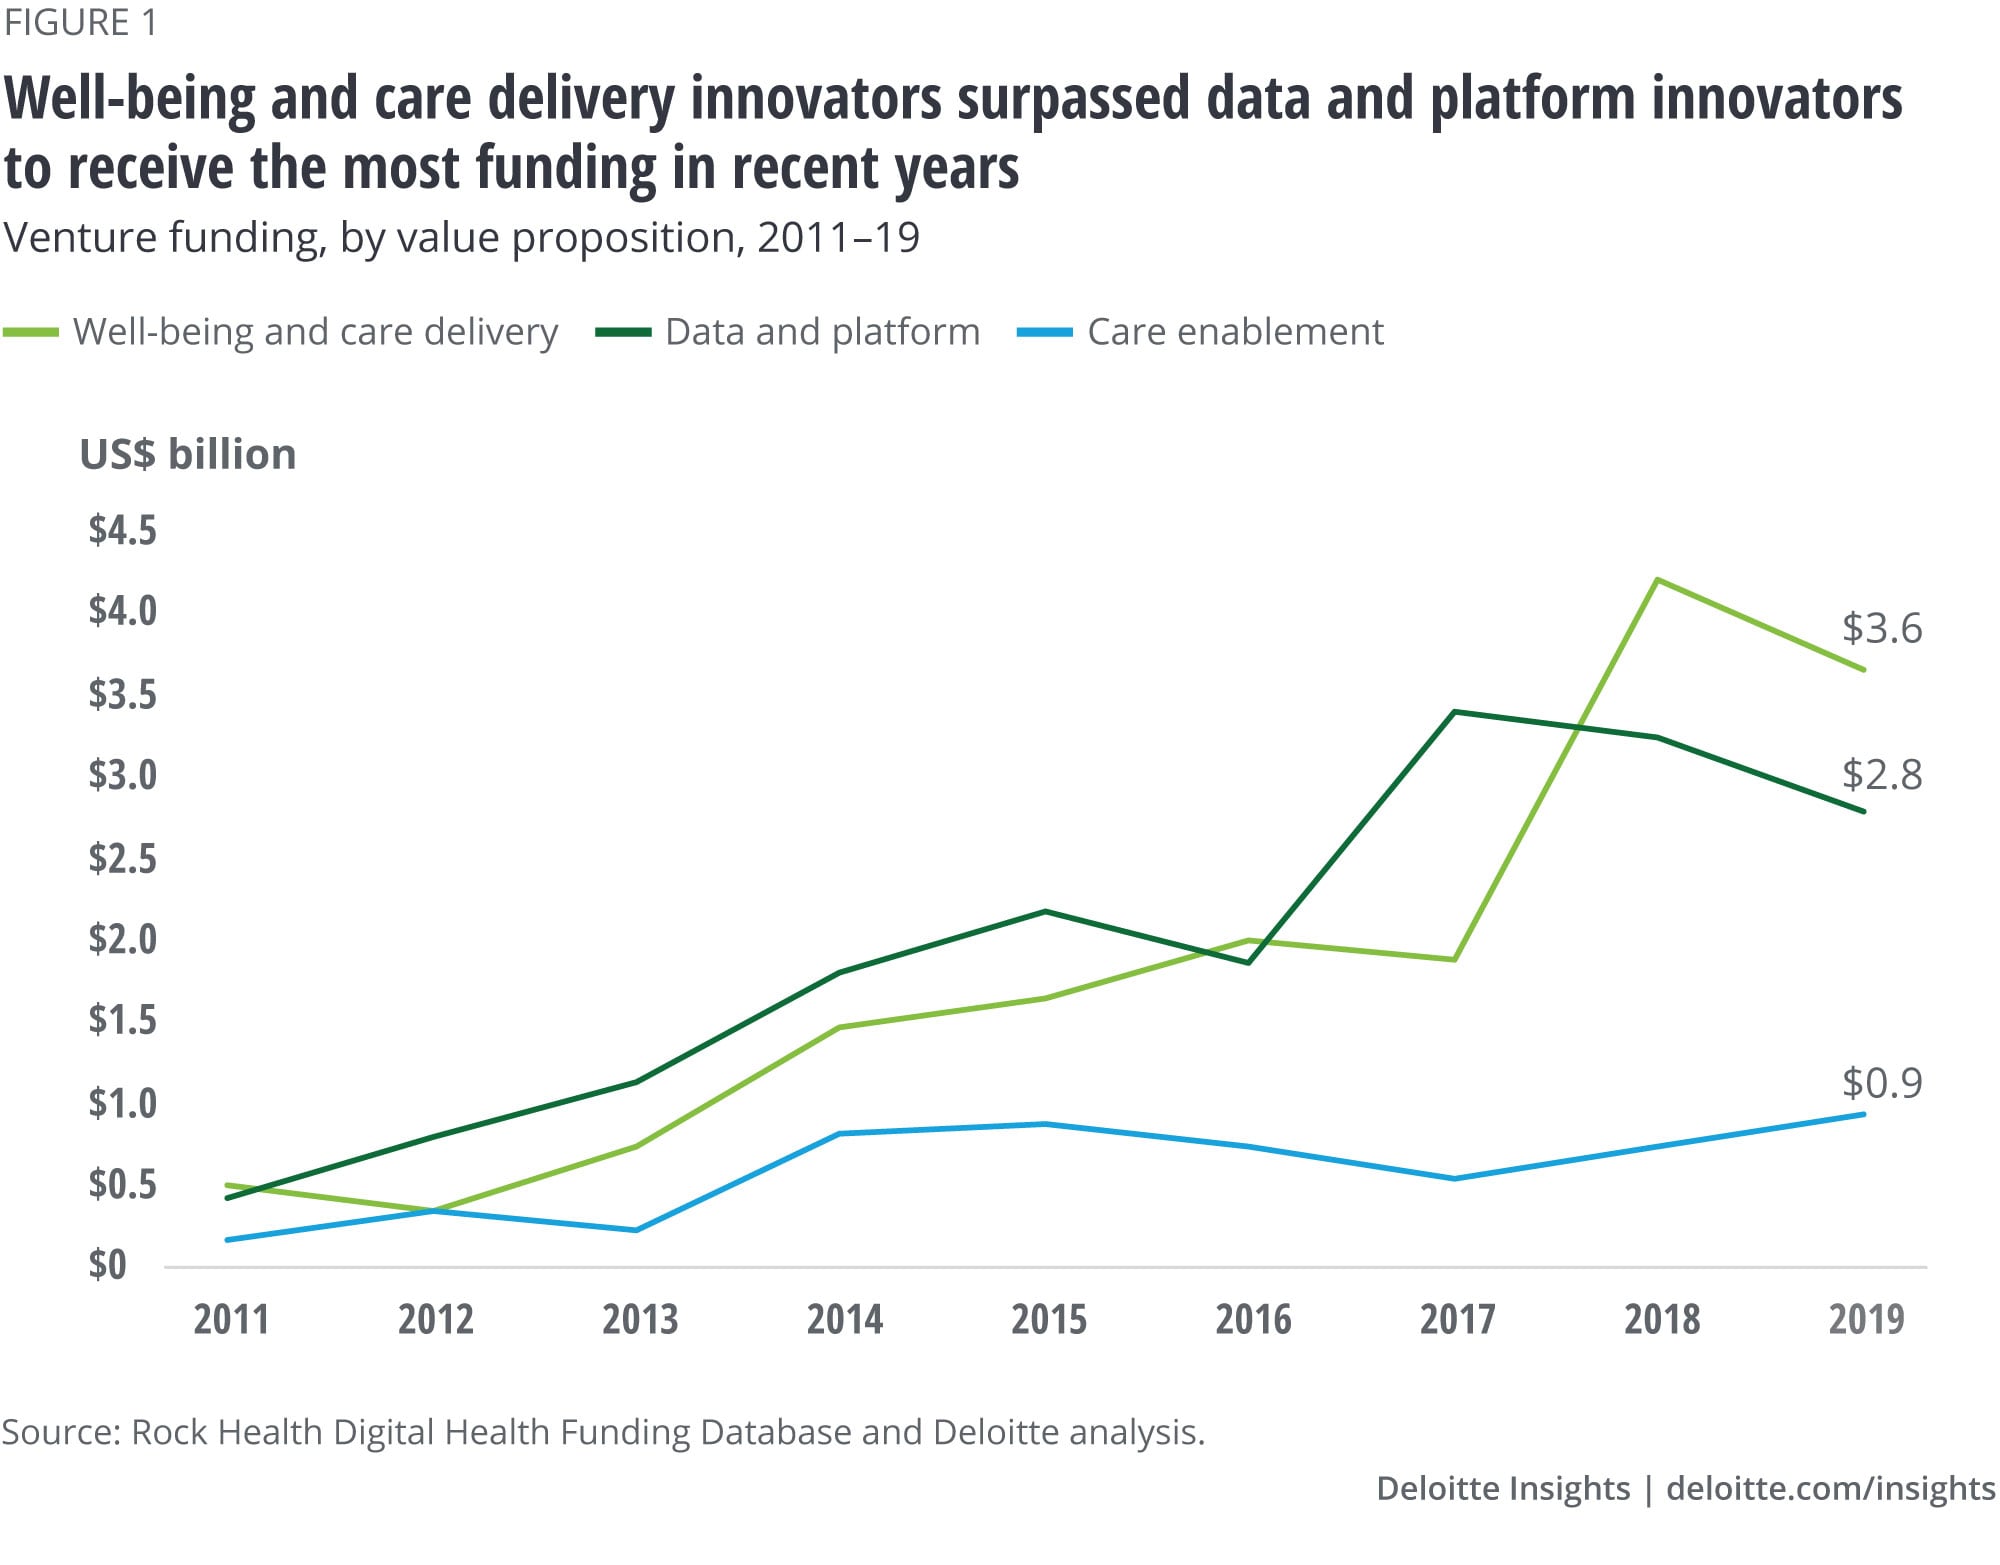 Well-being and care delivery startups surpassed data and platform startups to receive the most funding in recent years